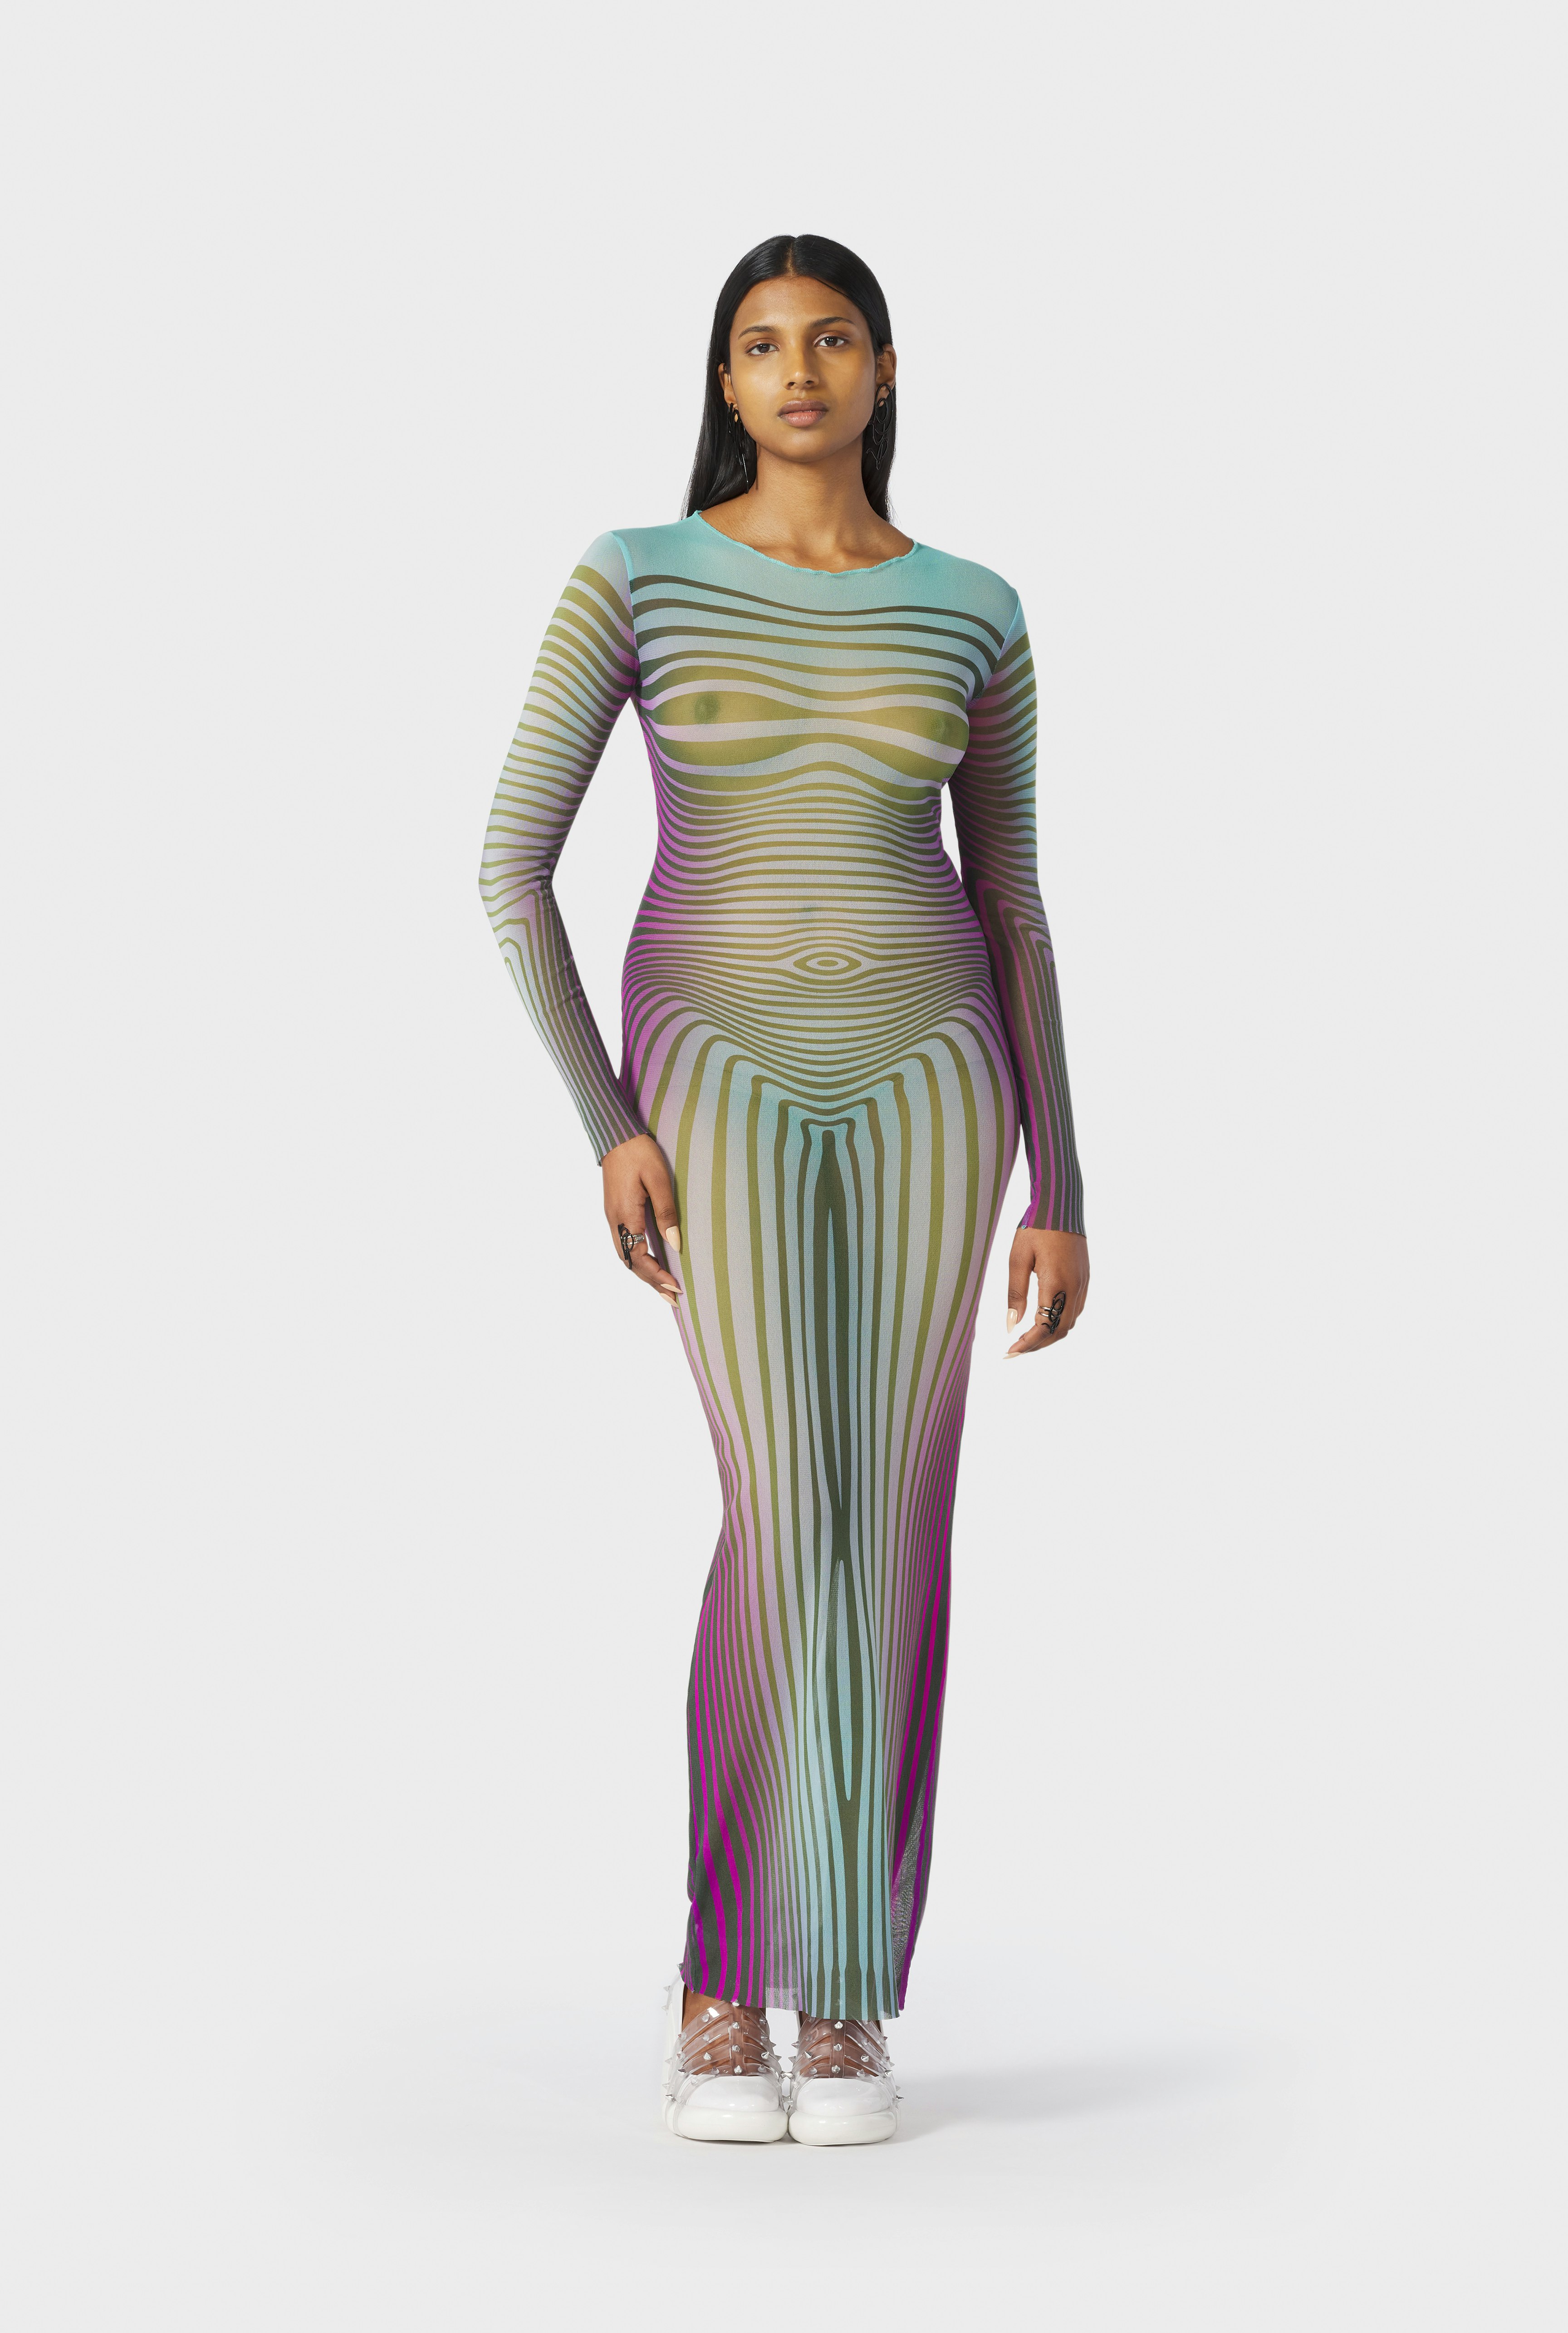 EXCLUSIVE - The Blue Body Morphing Dress